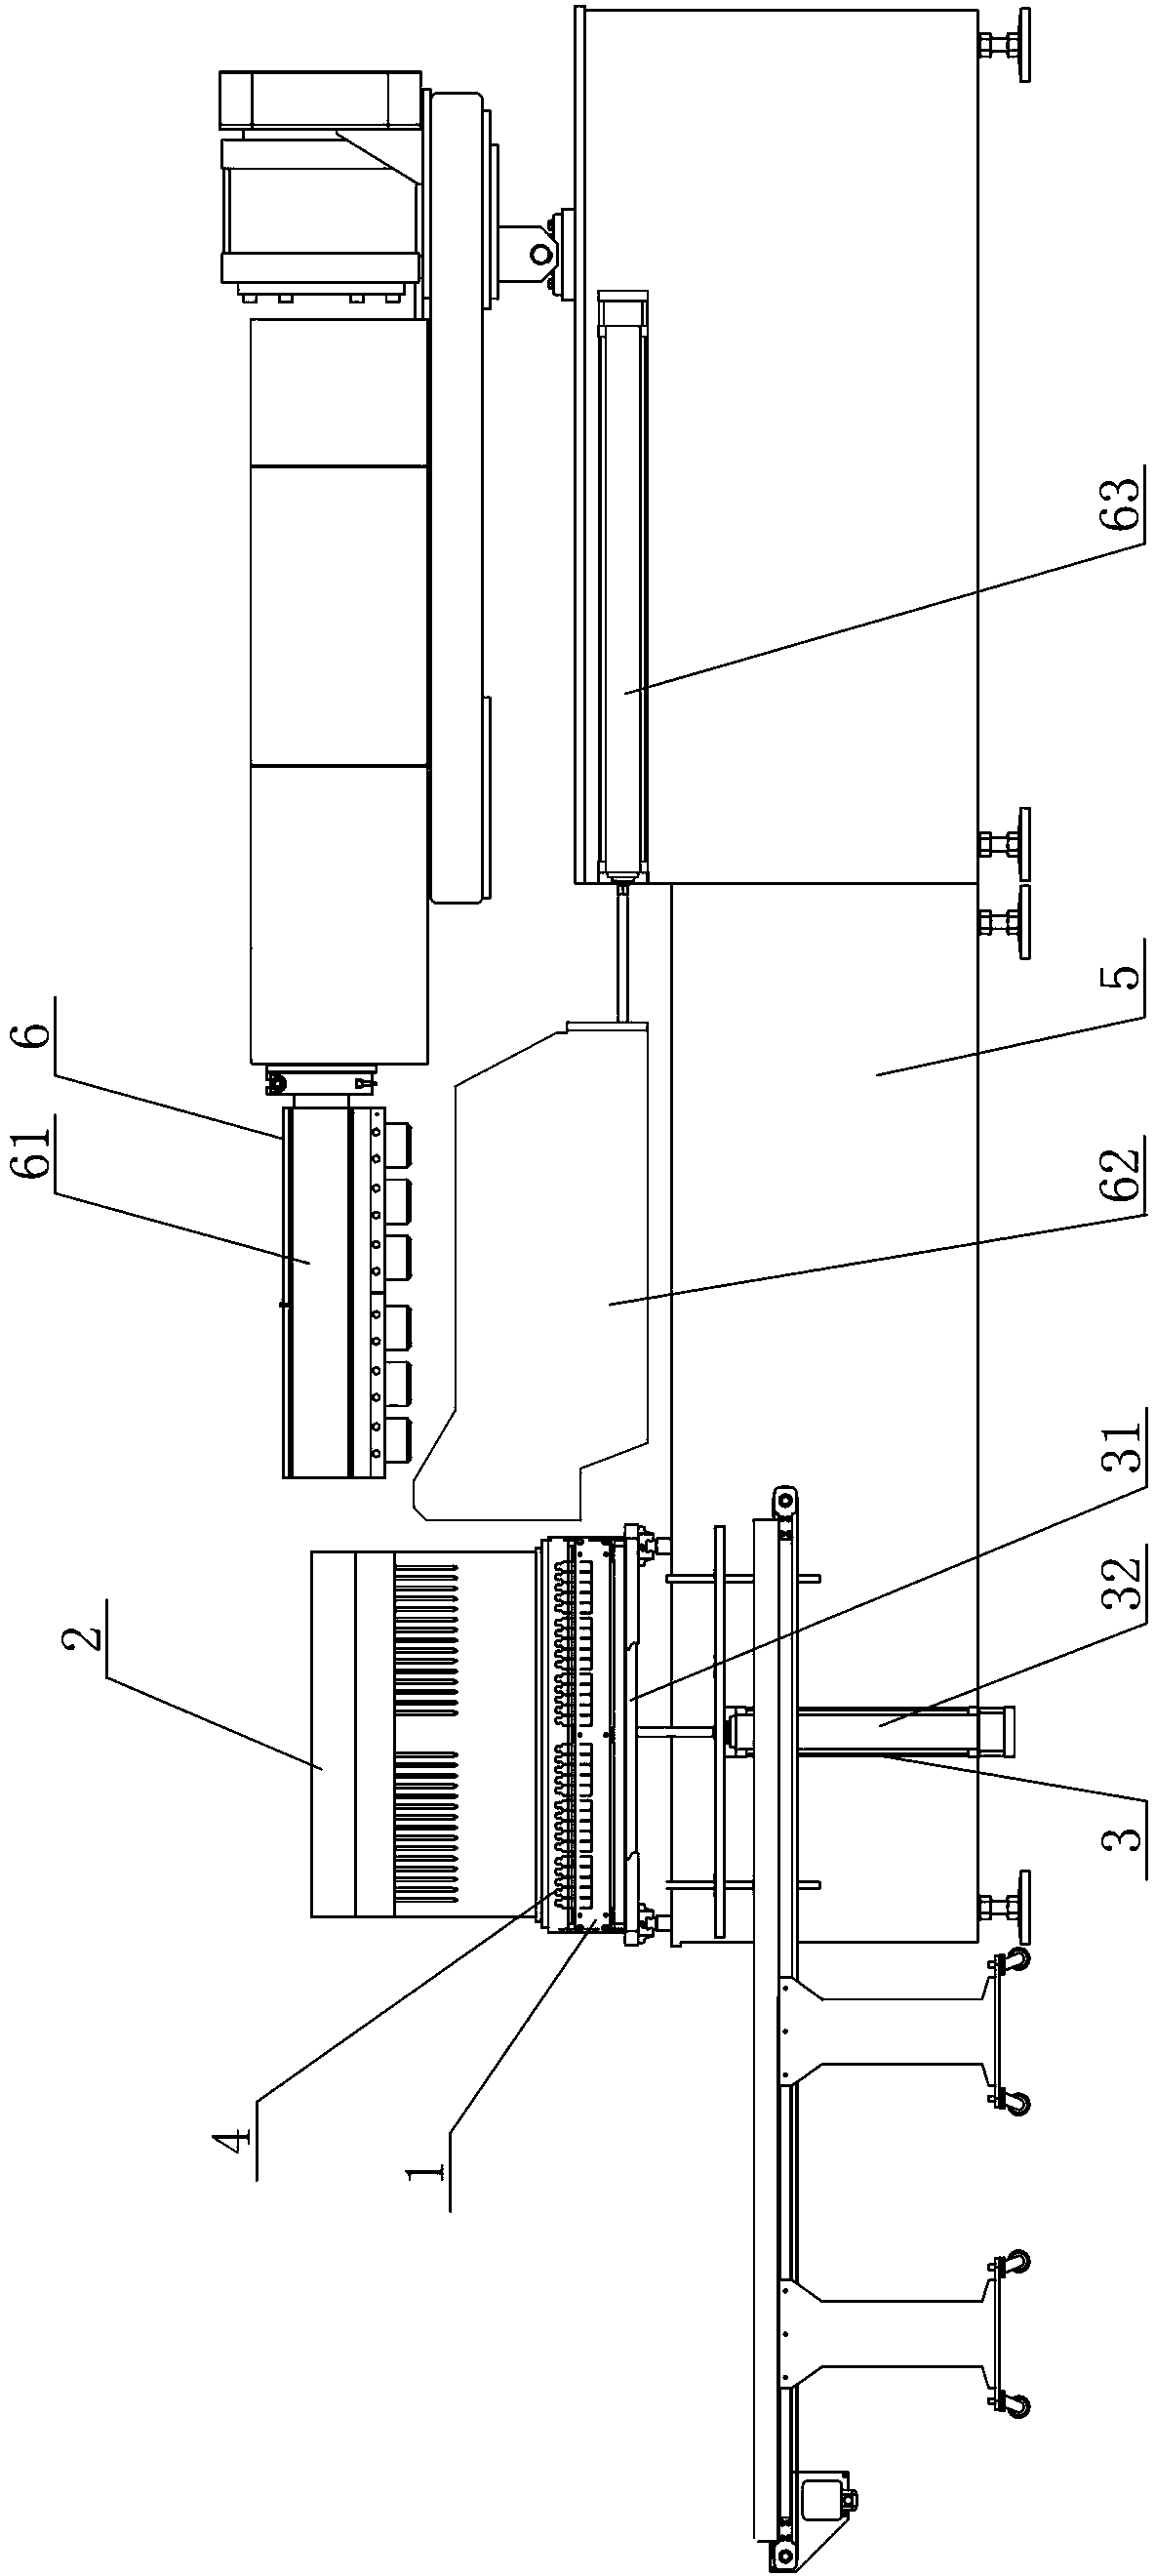 Plastic ampoule blowing-filing and sealing integrated machine